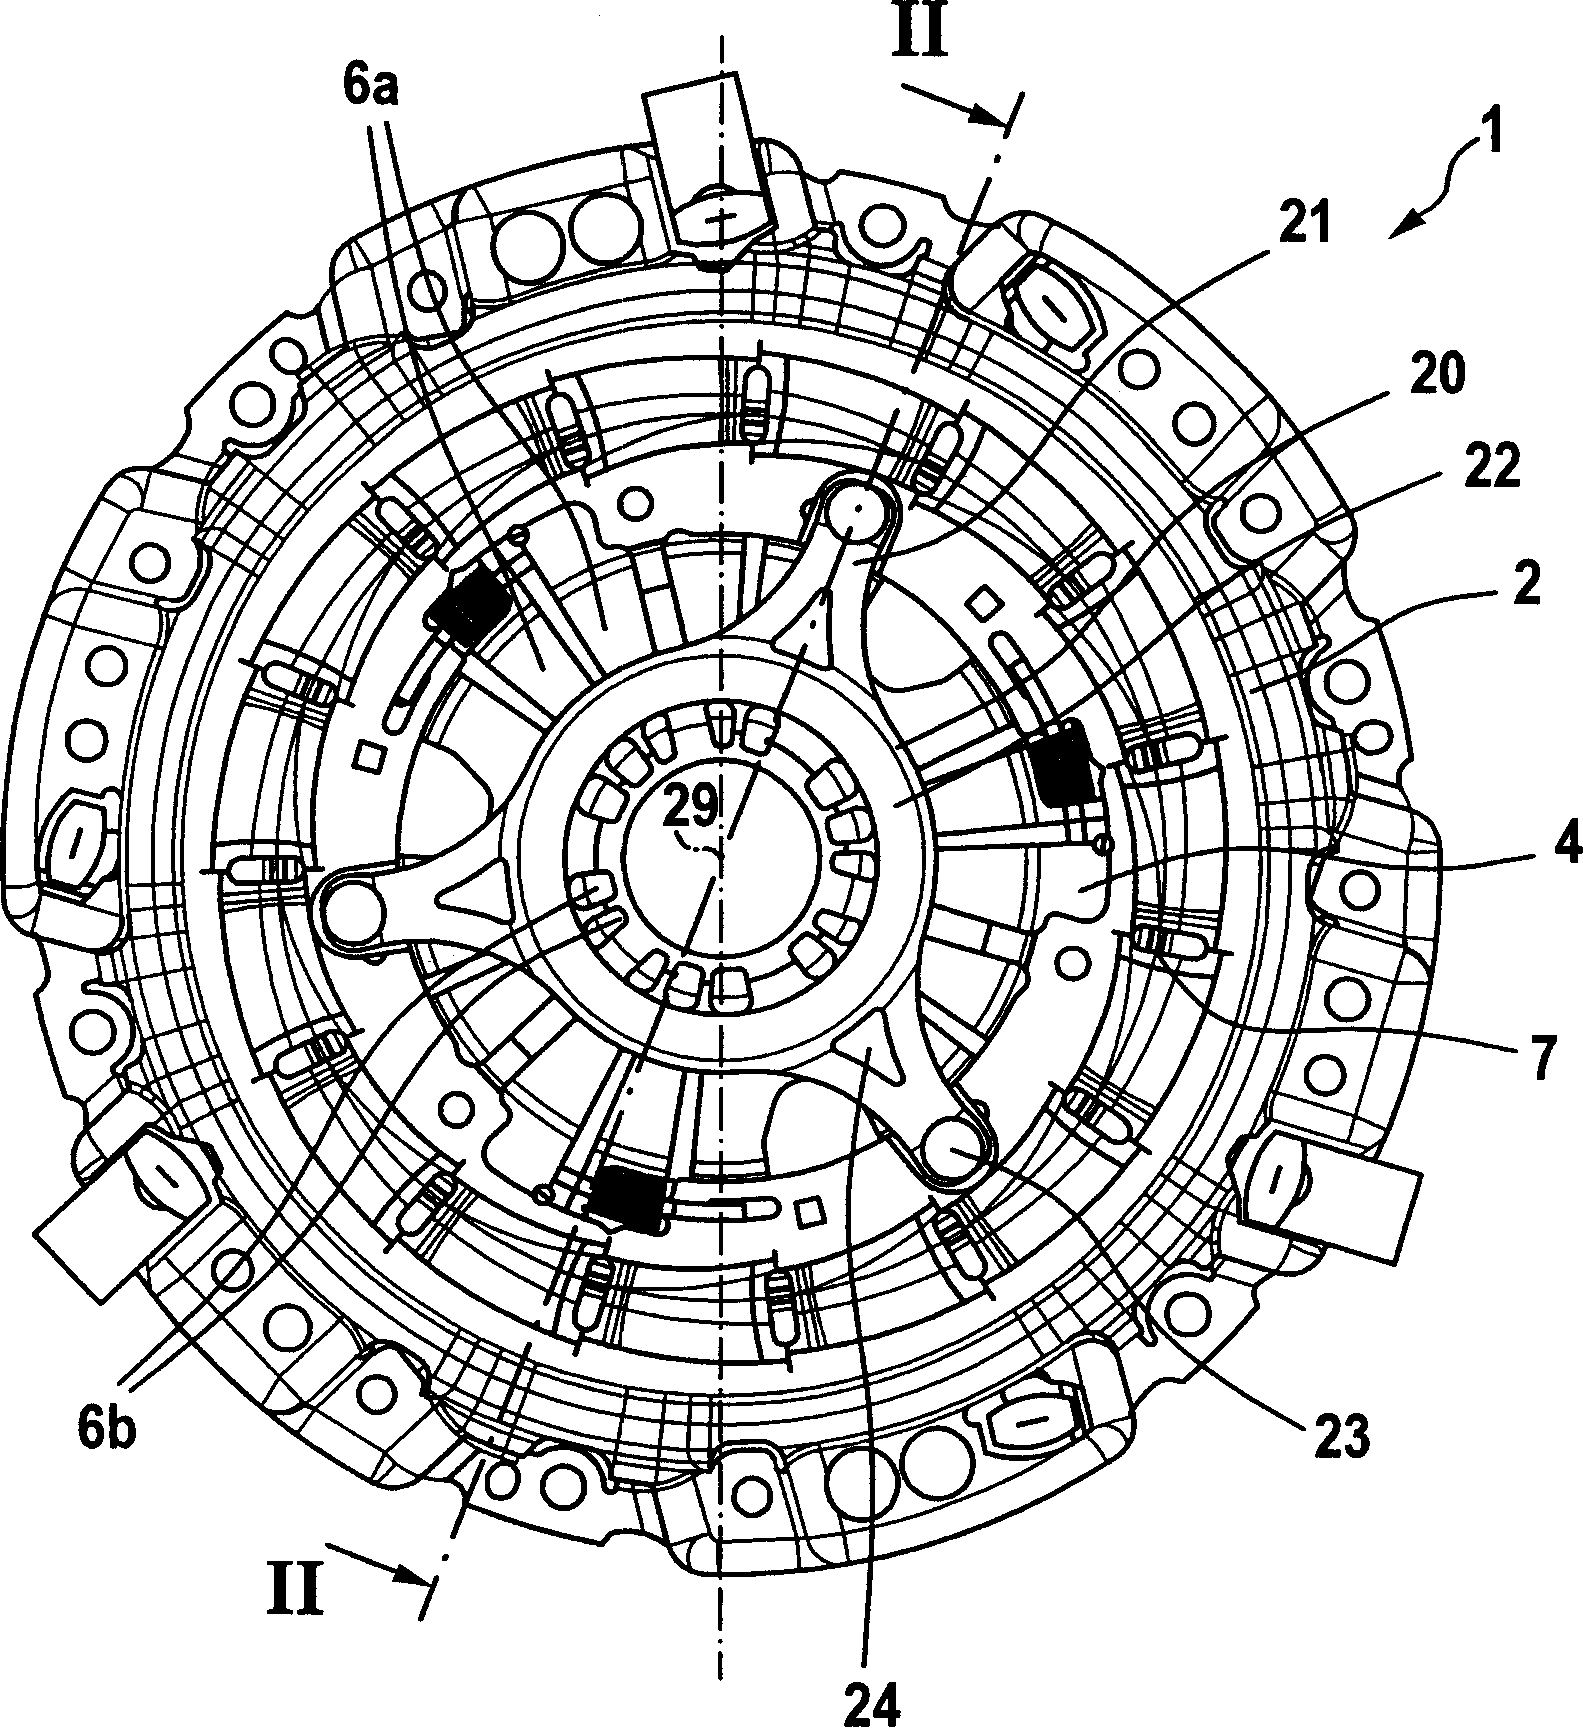 Friction clutch